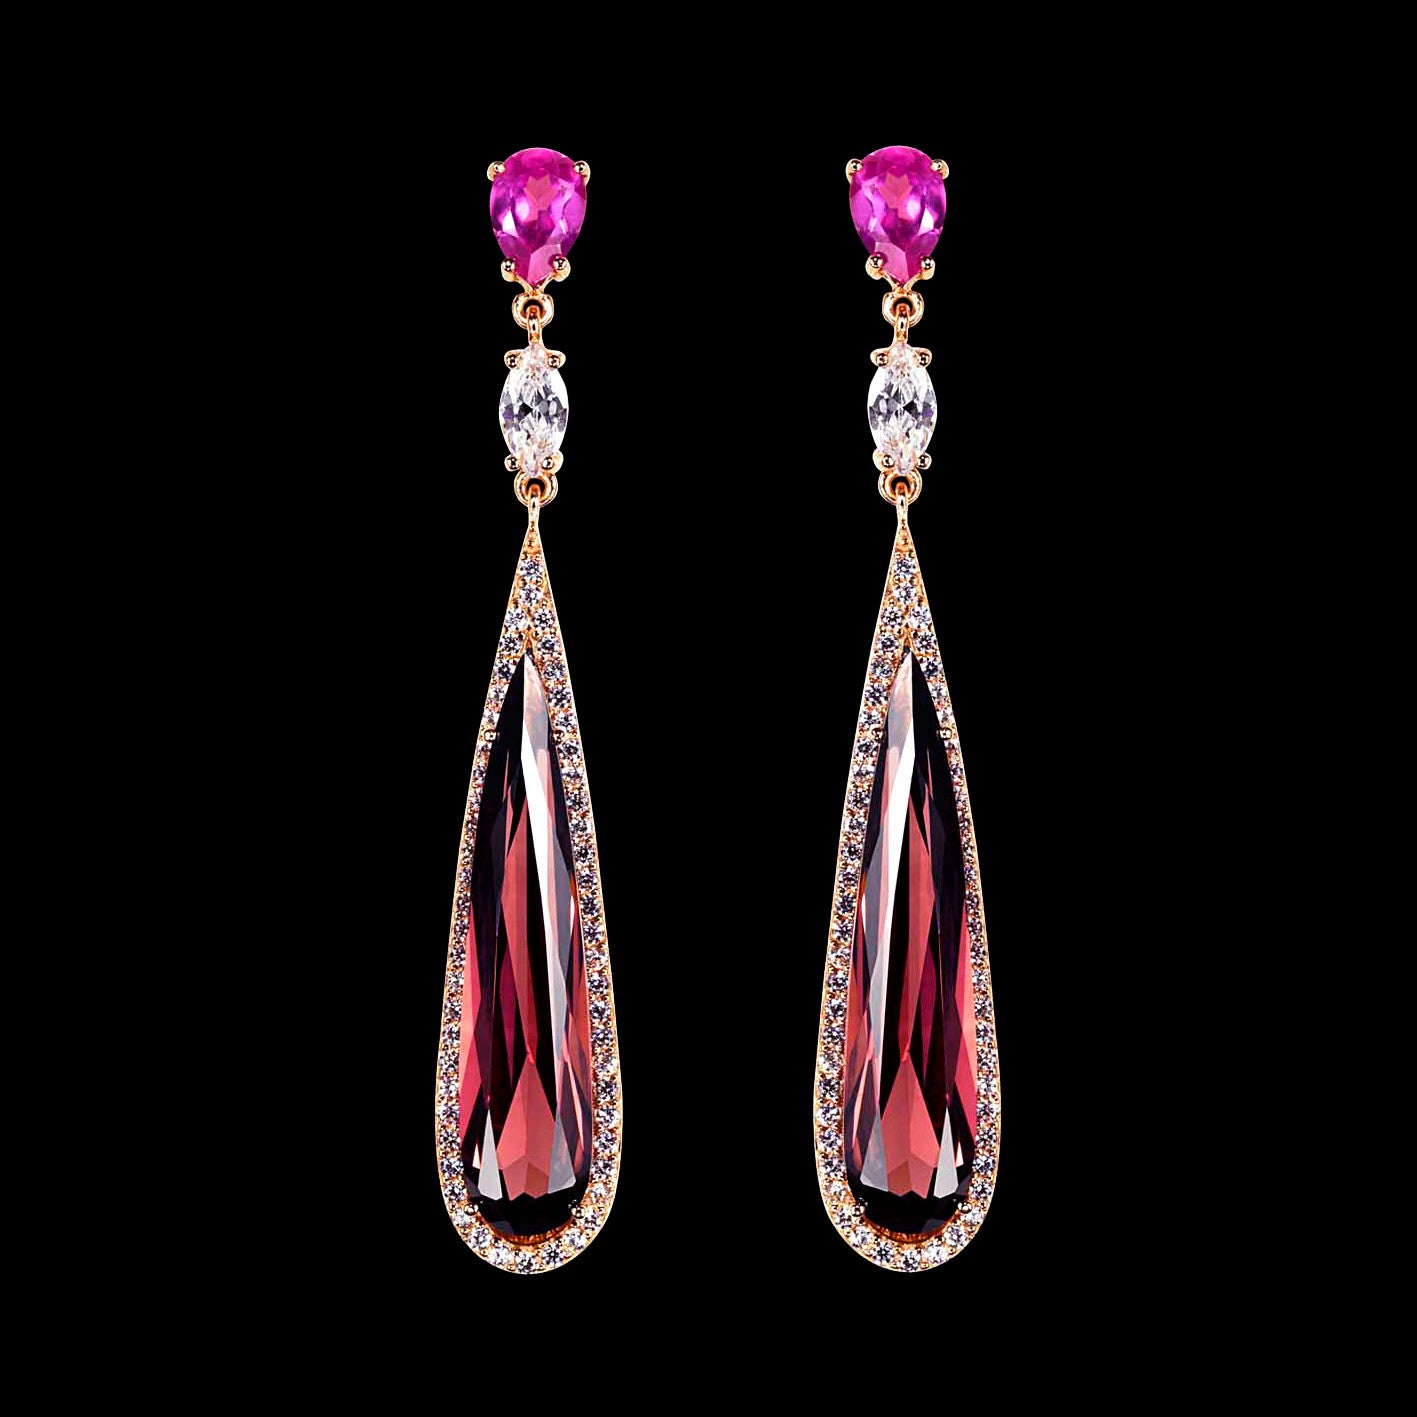 Shard Tourmaline Earrings, Earring, Anabela Chan Joaillerie - Fine jewelry with laboratory grown and created gemstones hand-crafted in the United Kingdom. Anabela Chan Joaillerie is the first fine jewellery brand in the world to champion laboratory-grown and created gemstones with high jewellery design, artisanal craftsmanship and a focus on ethical and sustainable innovations.